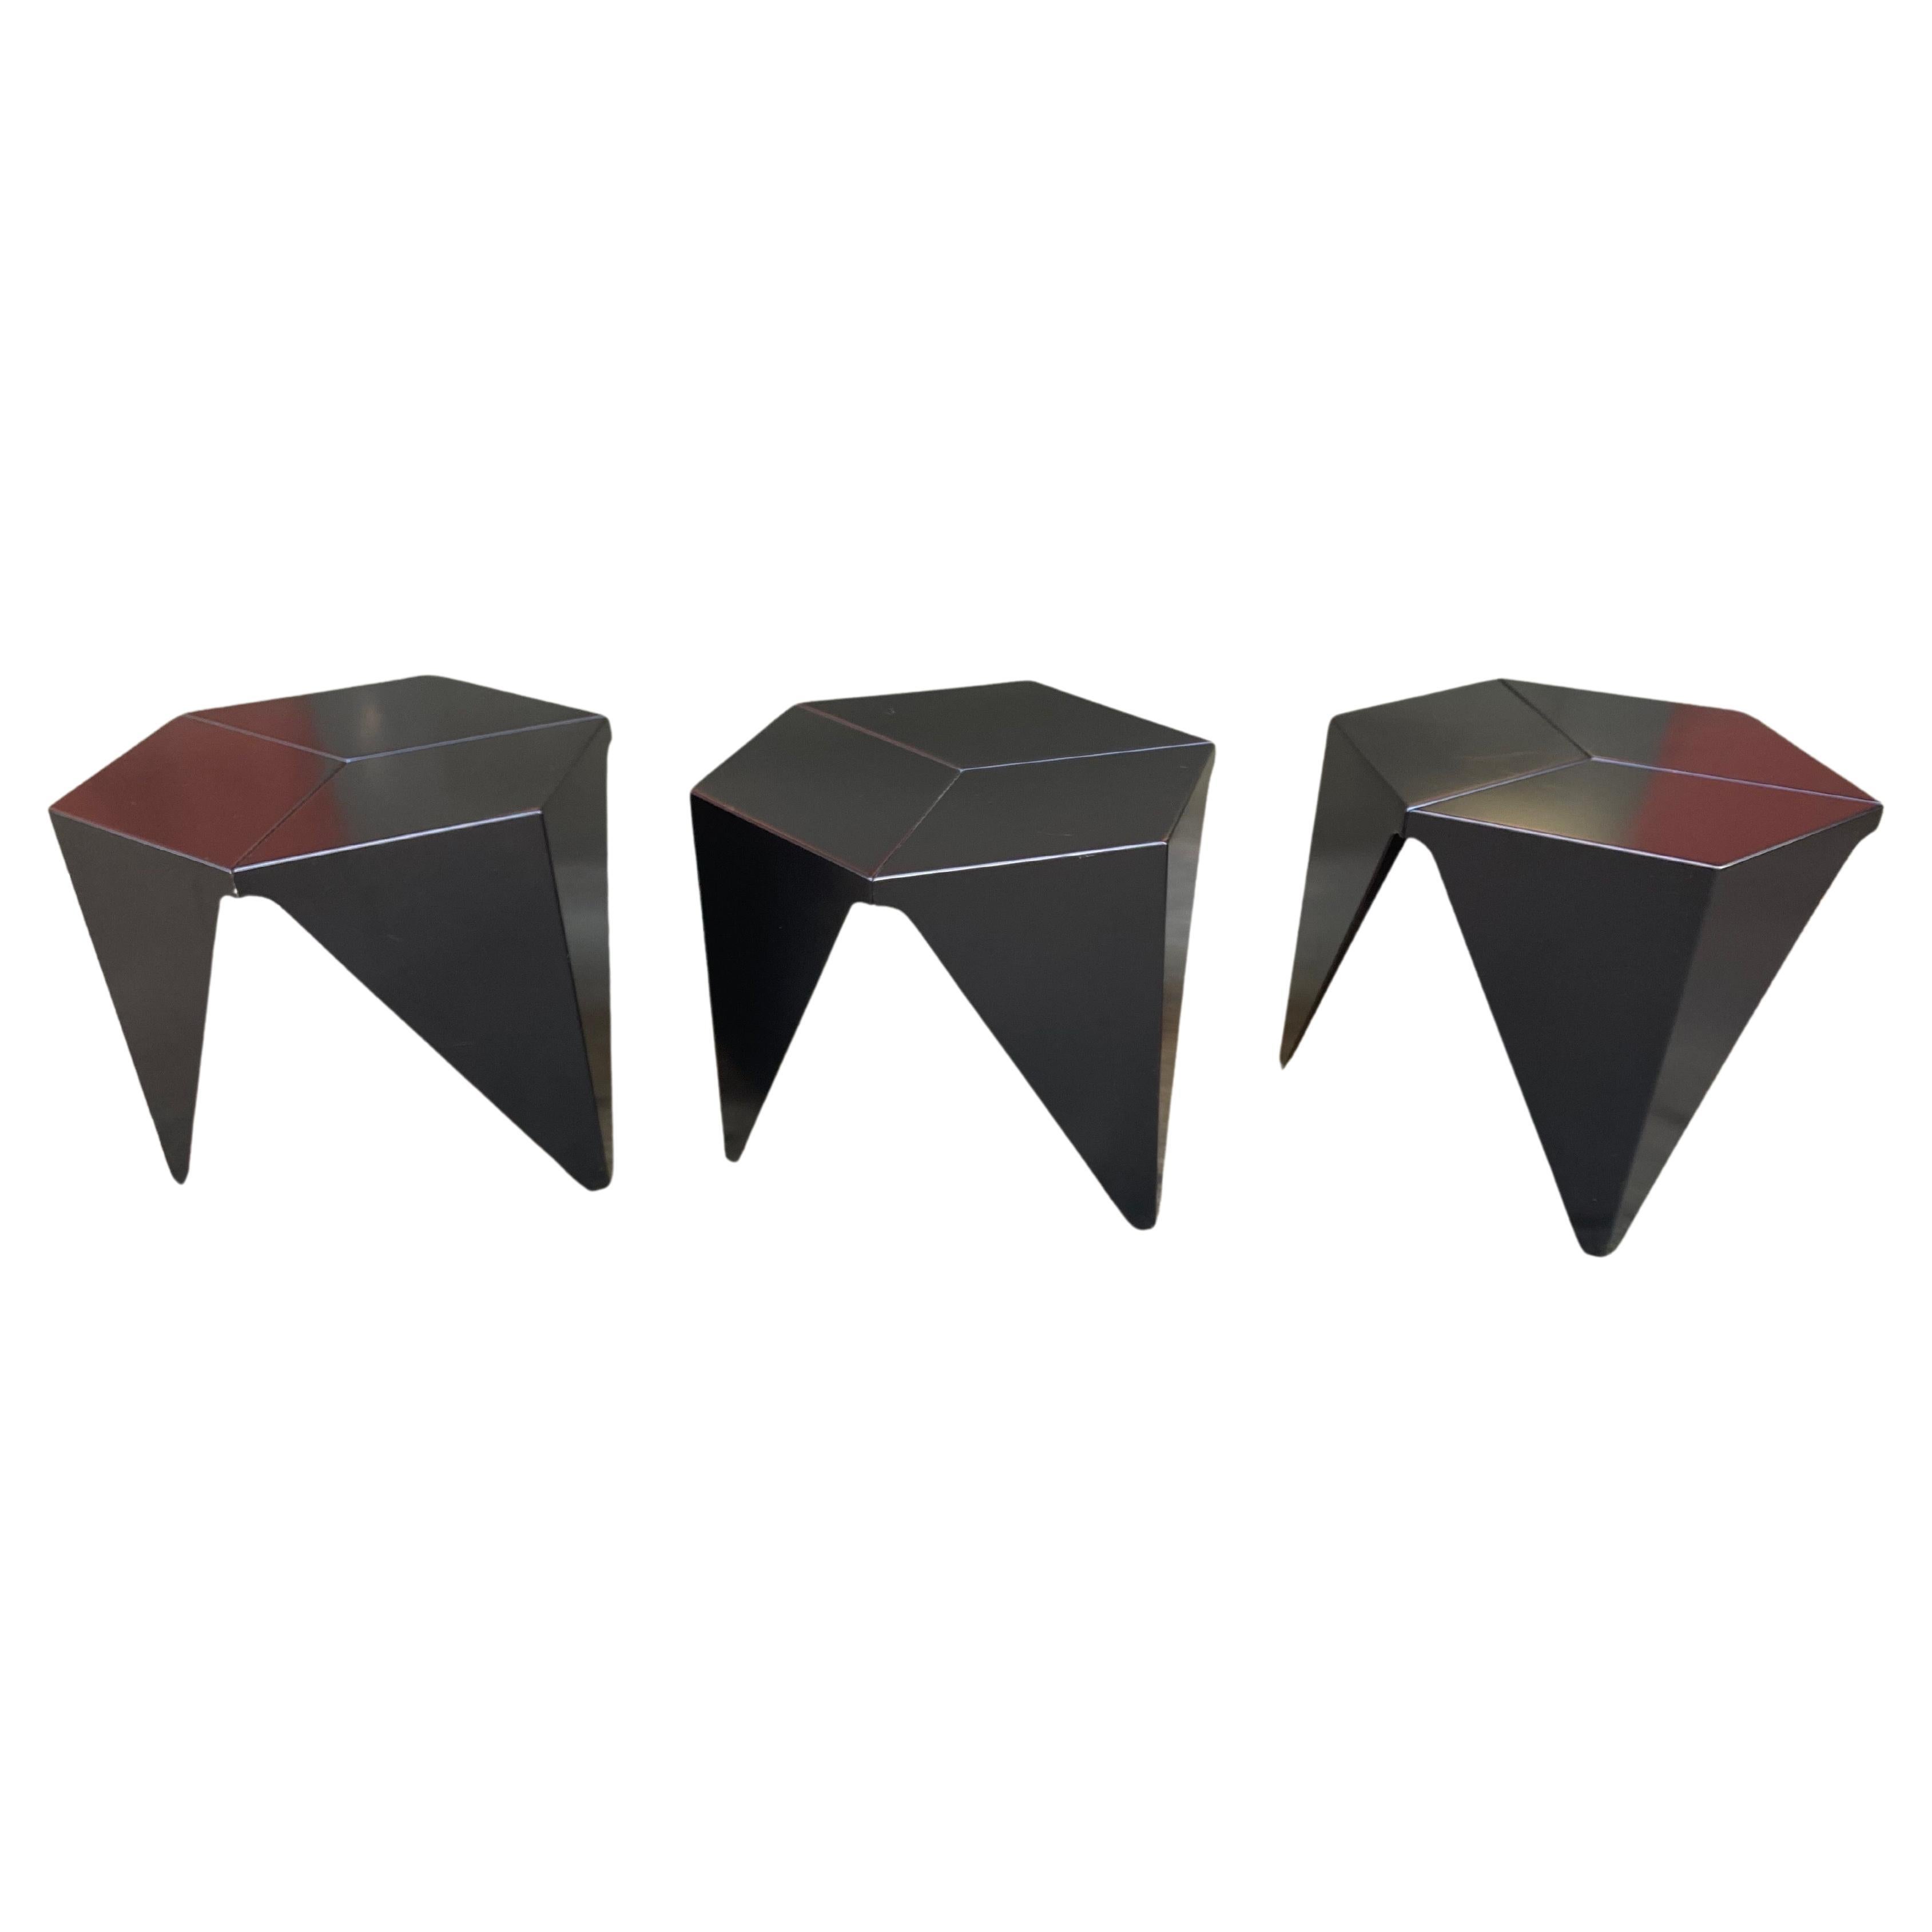 Noguchi Prismatic Tables for Vitra, 2 Available, priced separately!